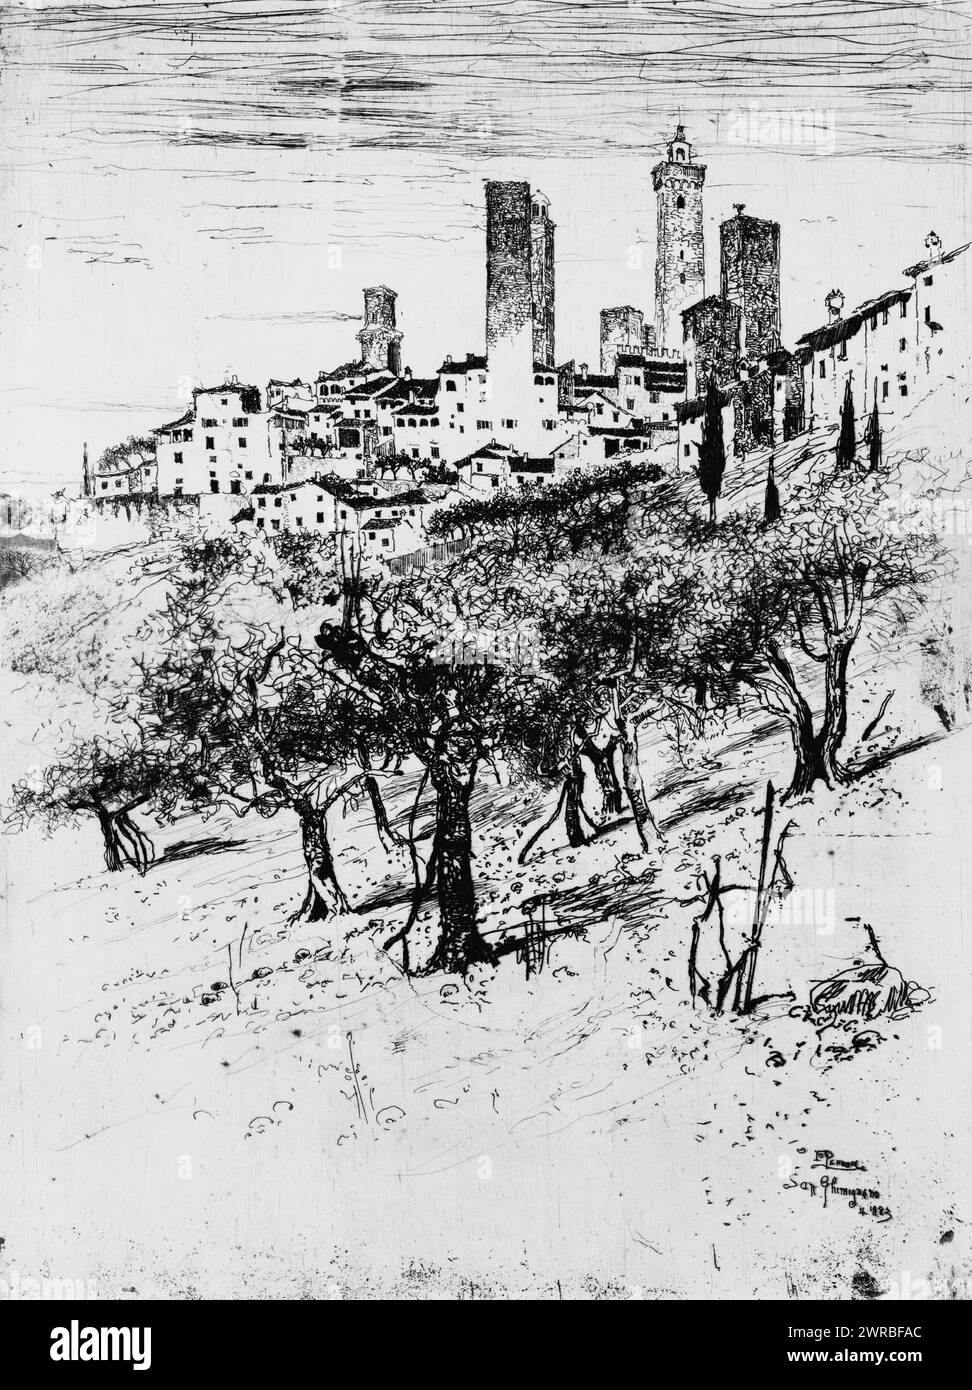 San Gimignano, Jo Pennell., Hill with trees and city in background., Pennell, Joseph, 1857-1926, artist, 1883., San Gimignano (Italy), 1880-1890, Cityscape prints, 1880-1890., Cityscape prints, 1880-1890, Etchings, 1880-1890, 1 print: etching Stock Photo